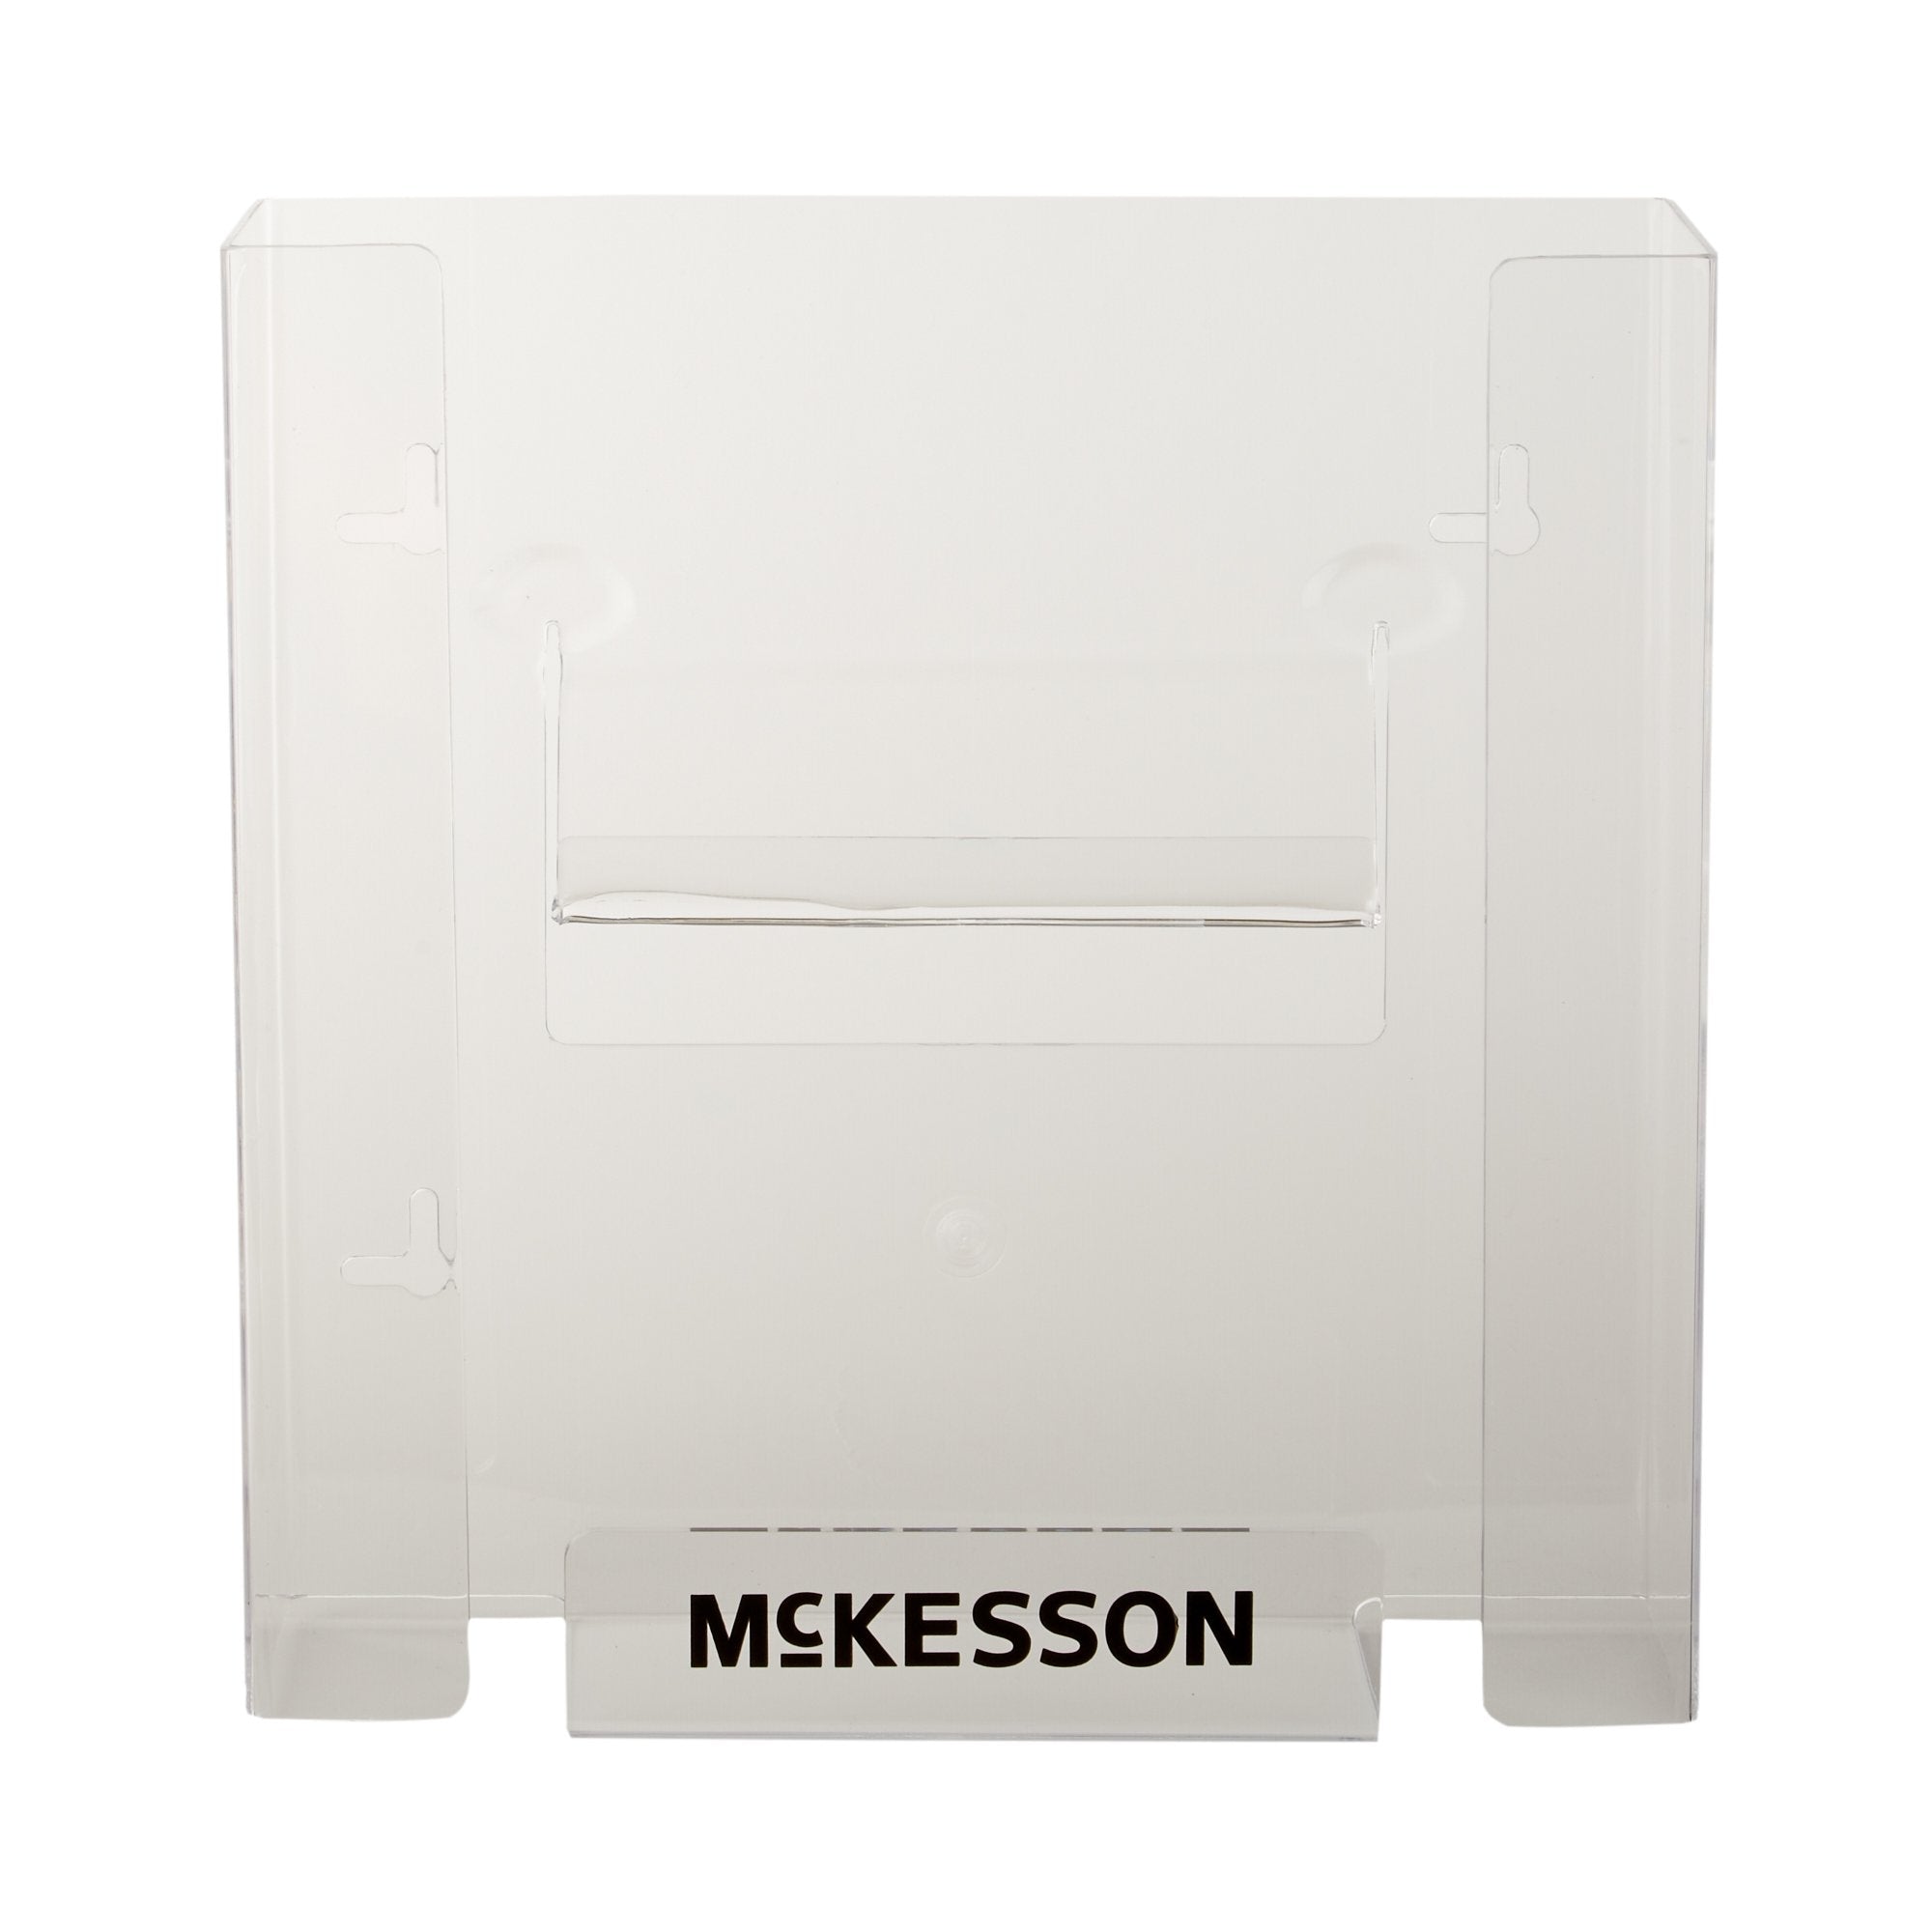 Glove Box Holder McKesson Horizontal or Vertical Mounted 2-Box Capacity Clear 4 X 10 X 10-3/4 Inch Plastic